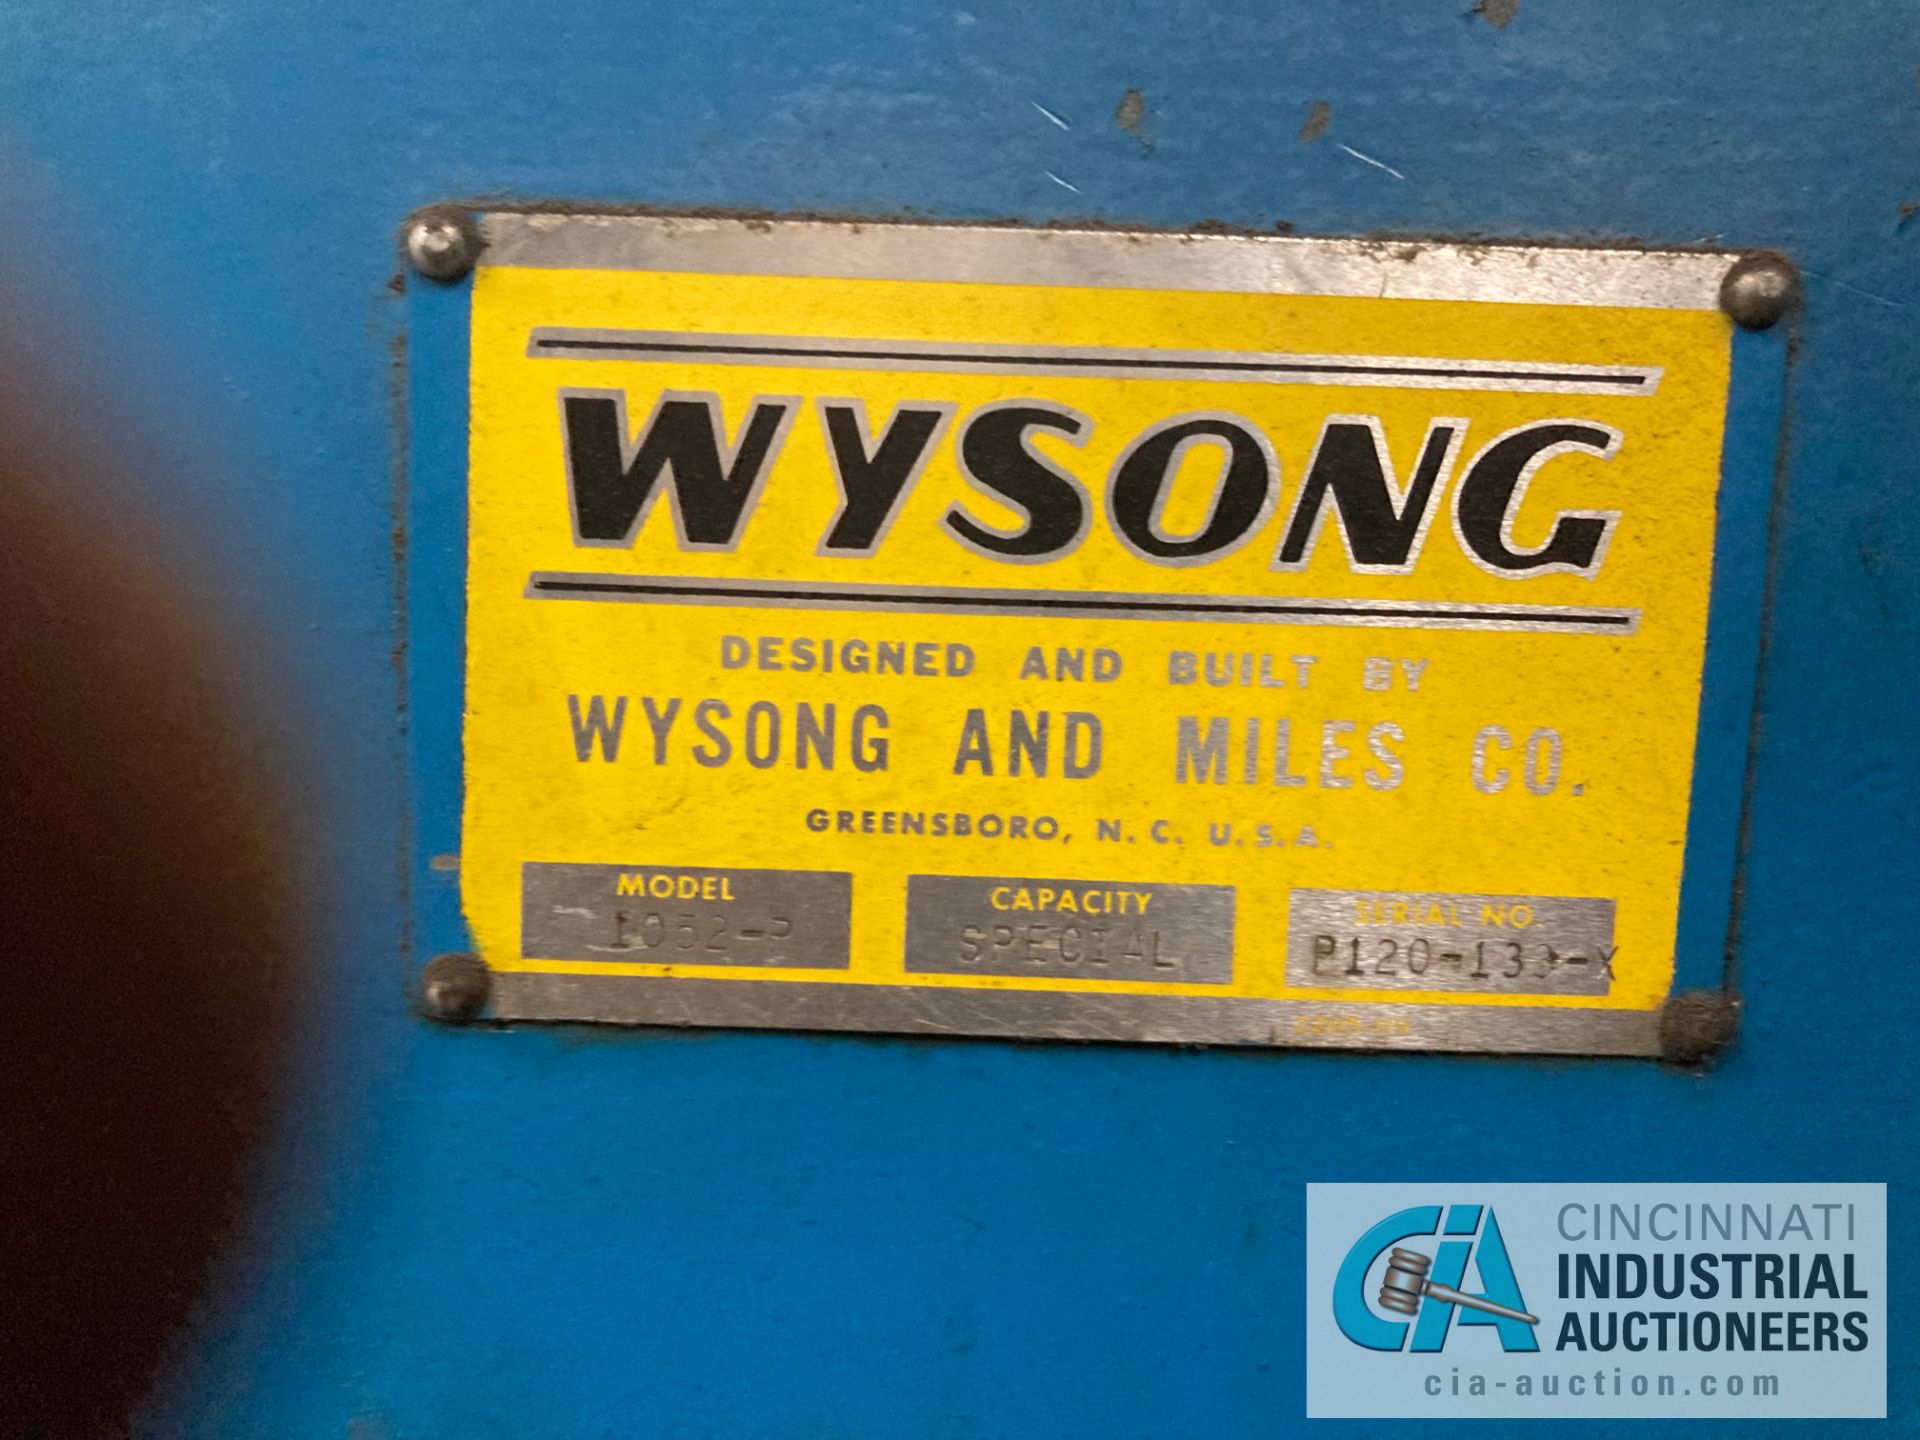 ****53" WYSONG 1052-5 CUT OFF SHEAR, CAPACITY SPECIAL L; S/N P120-133-X - Image 3 of 3